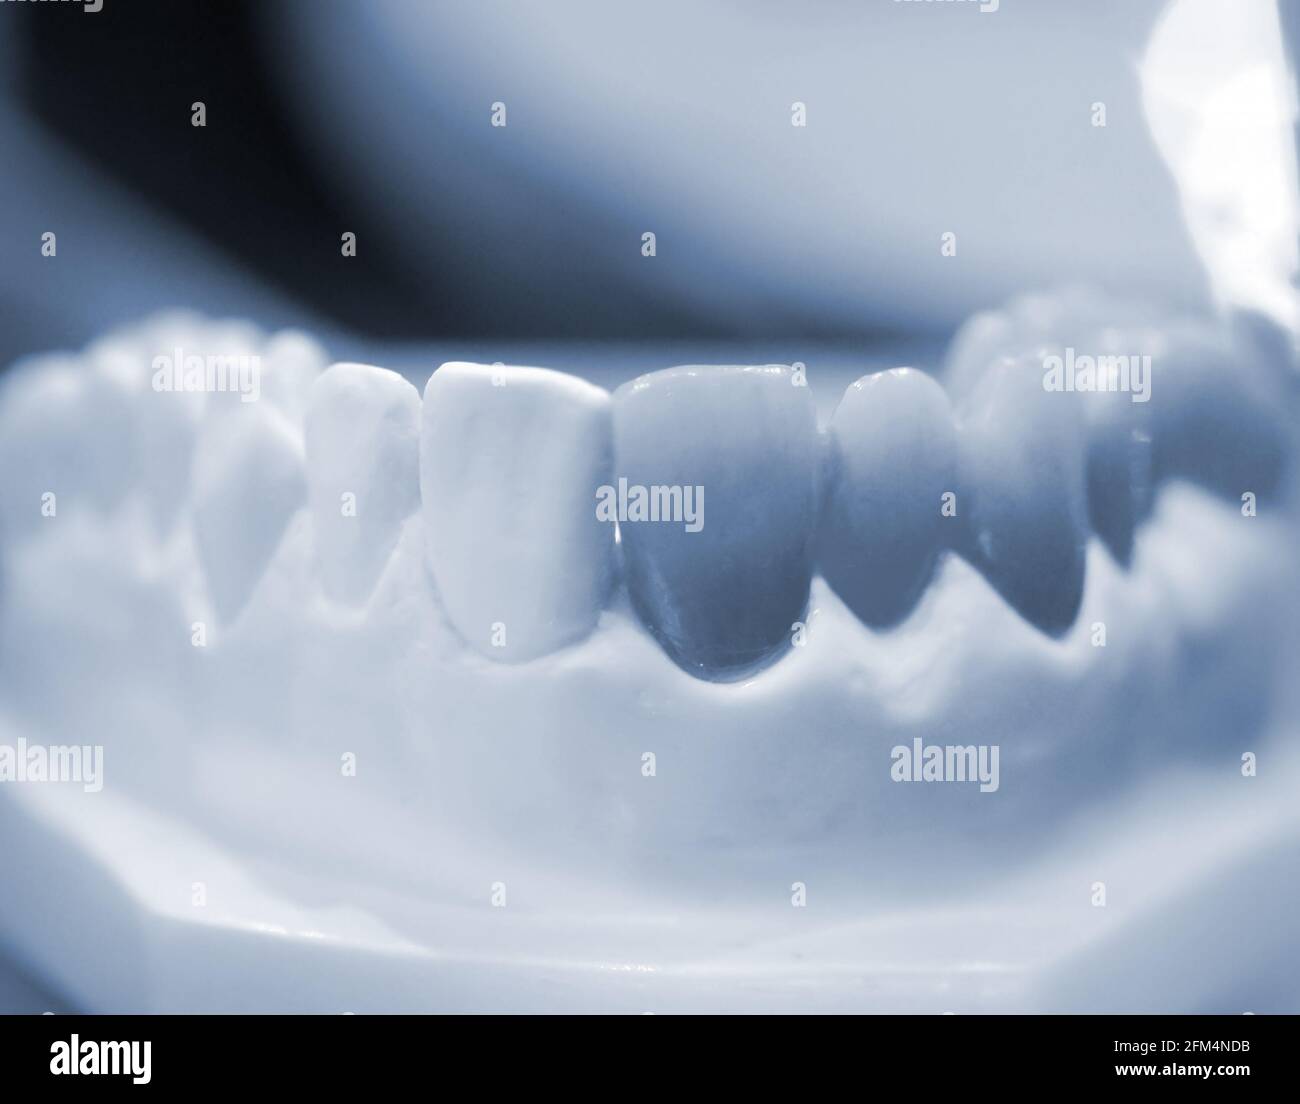 Model of human teeth with artificial teeth close-up. Stock Photo